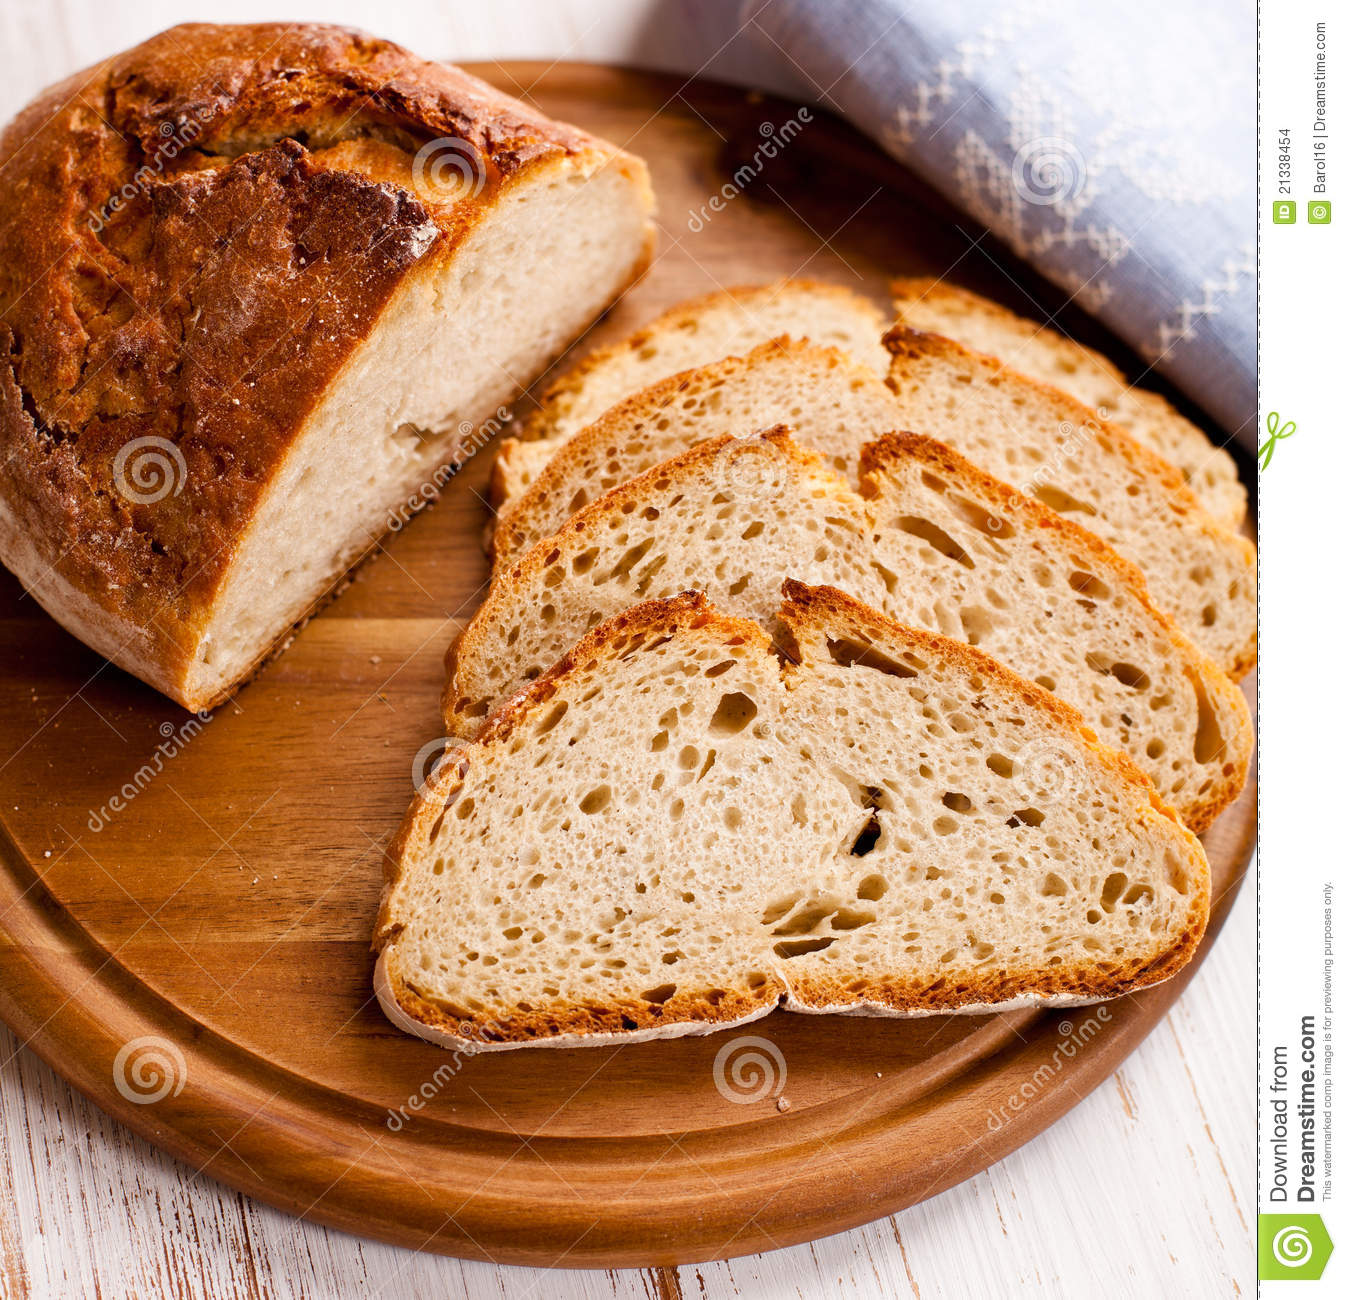 Sourdough Bread On Kitchen Board Stock Images   Image  21338454